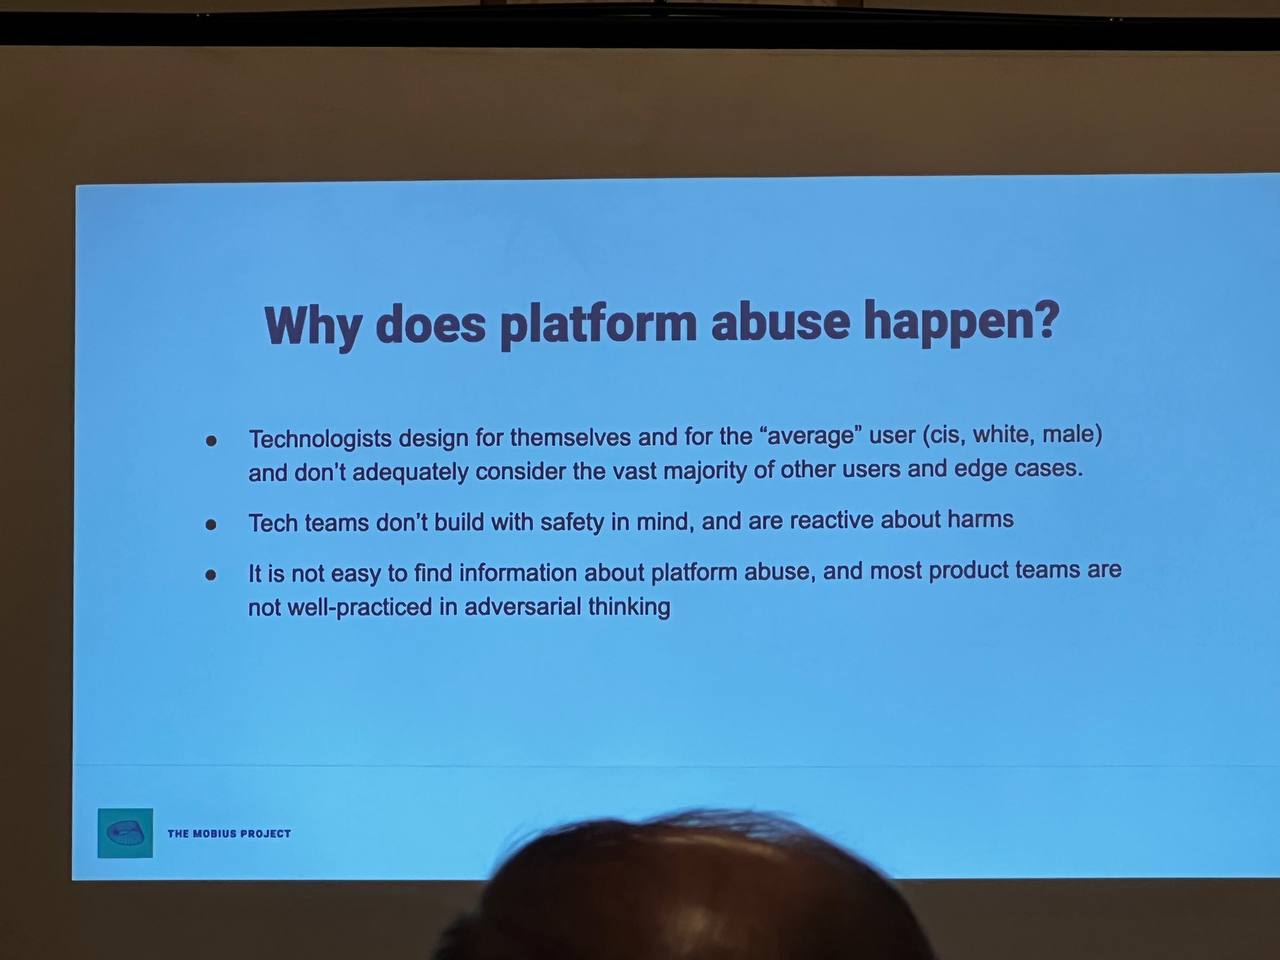 Why does platform abuse happen? Technologists design for themselves and the average user which is cis white mail and don't adequately consider the vast majority of other users and edge cases. They do not build with safety in mind and are reactive about harms. It is not easy to find information about platform abuse and most teams are not practiced in adversarial thinking.